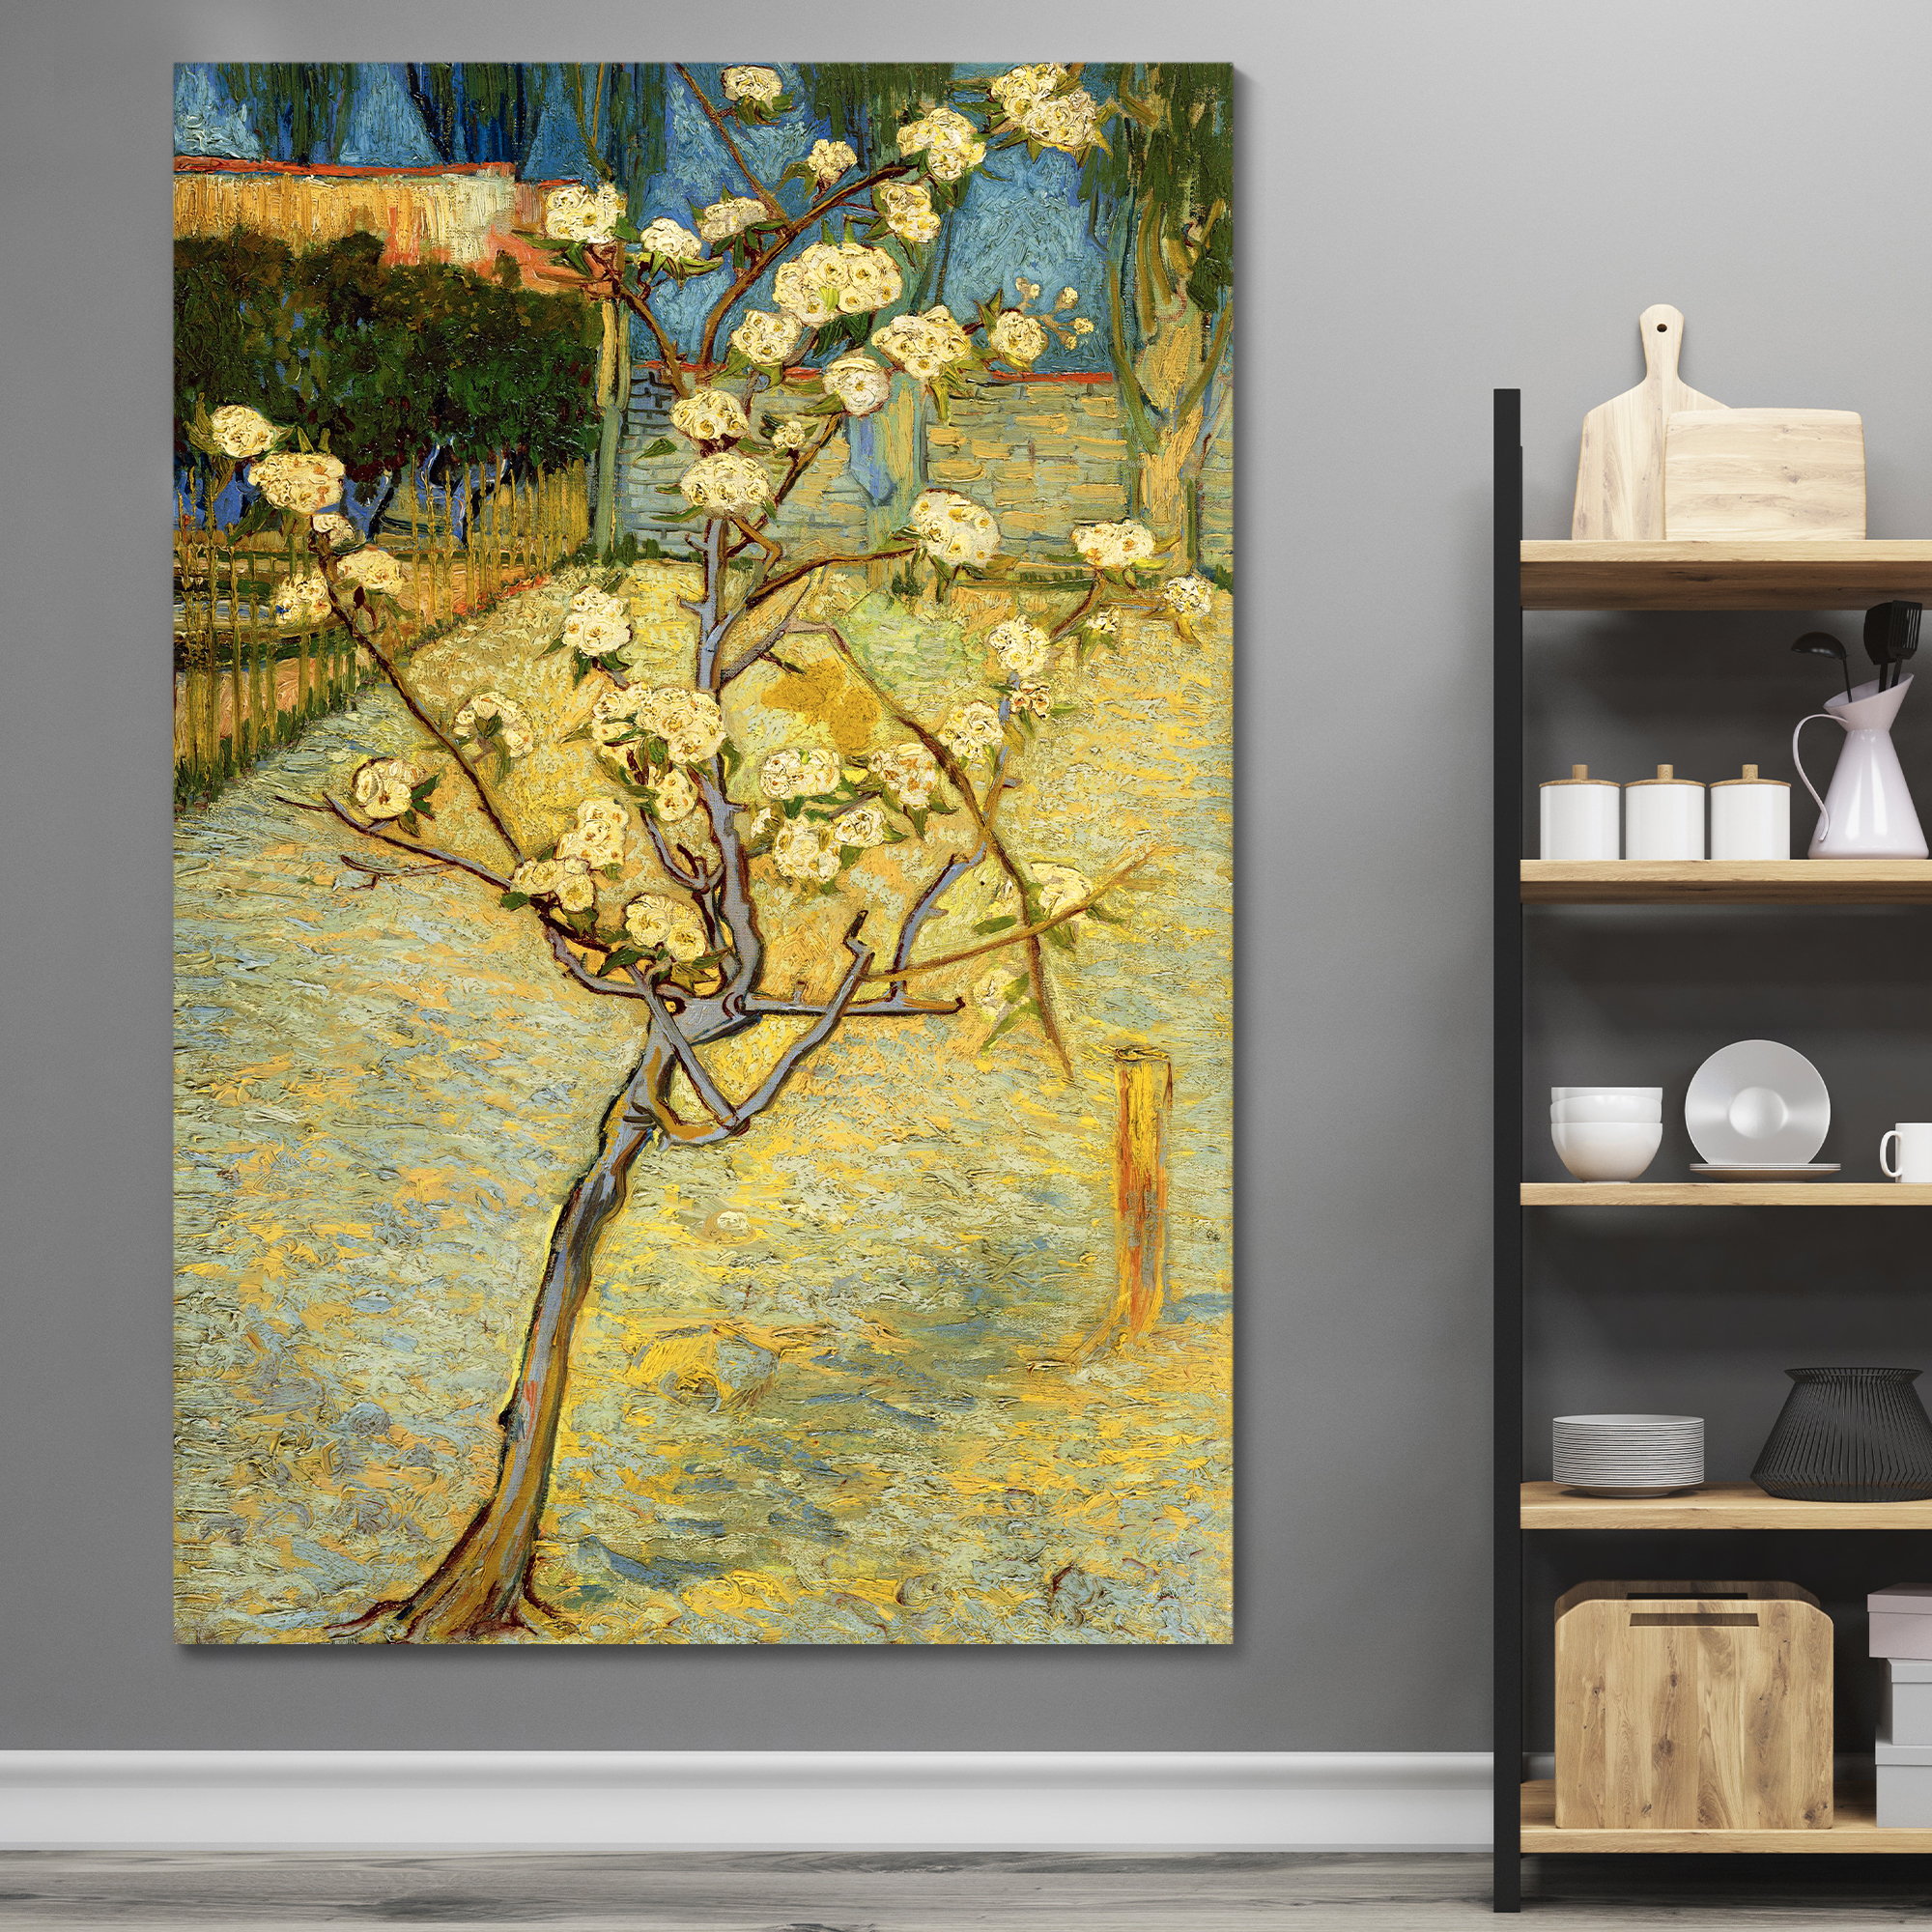 Small Pear Tree in Blossom by Vincent Van Gogh - Canvas Print Wall Art Famous Oil Painting Reproduction - 32